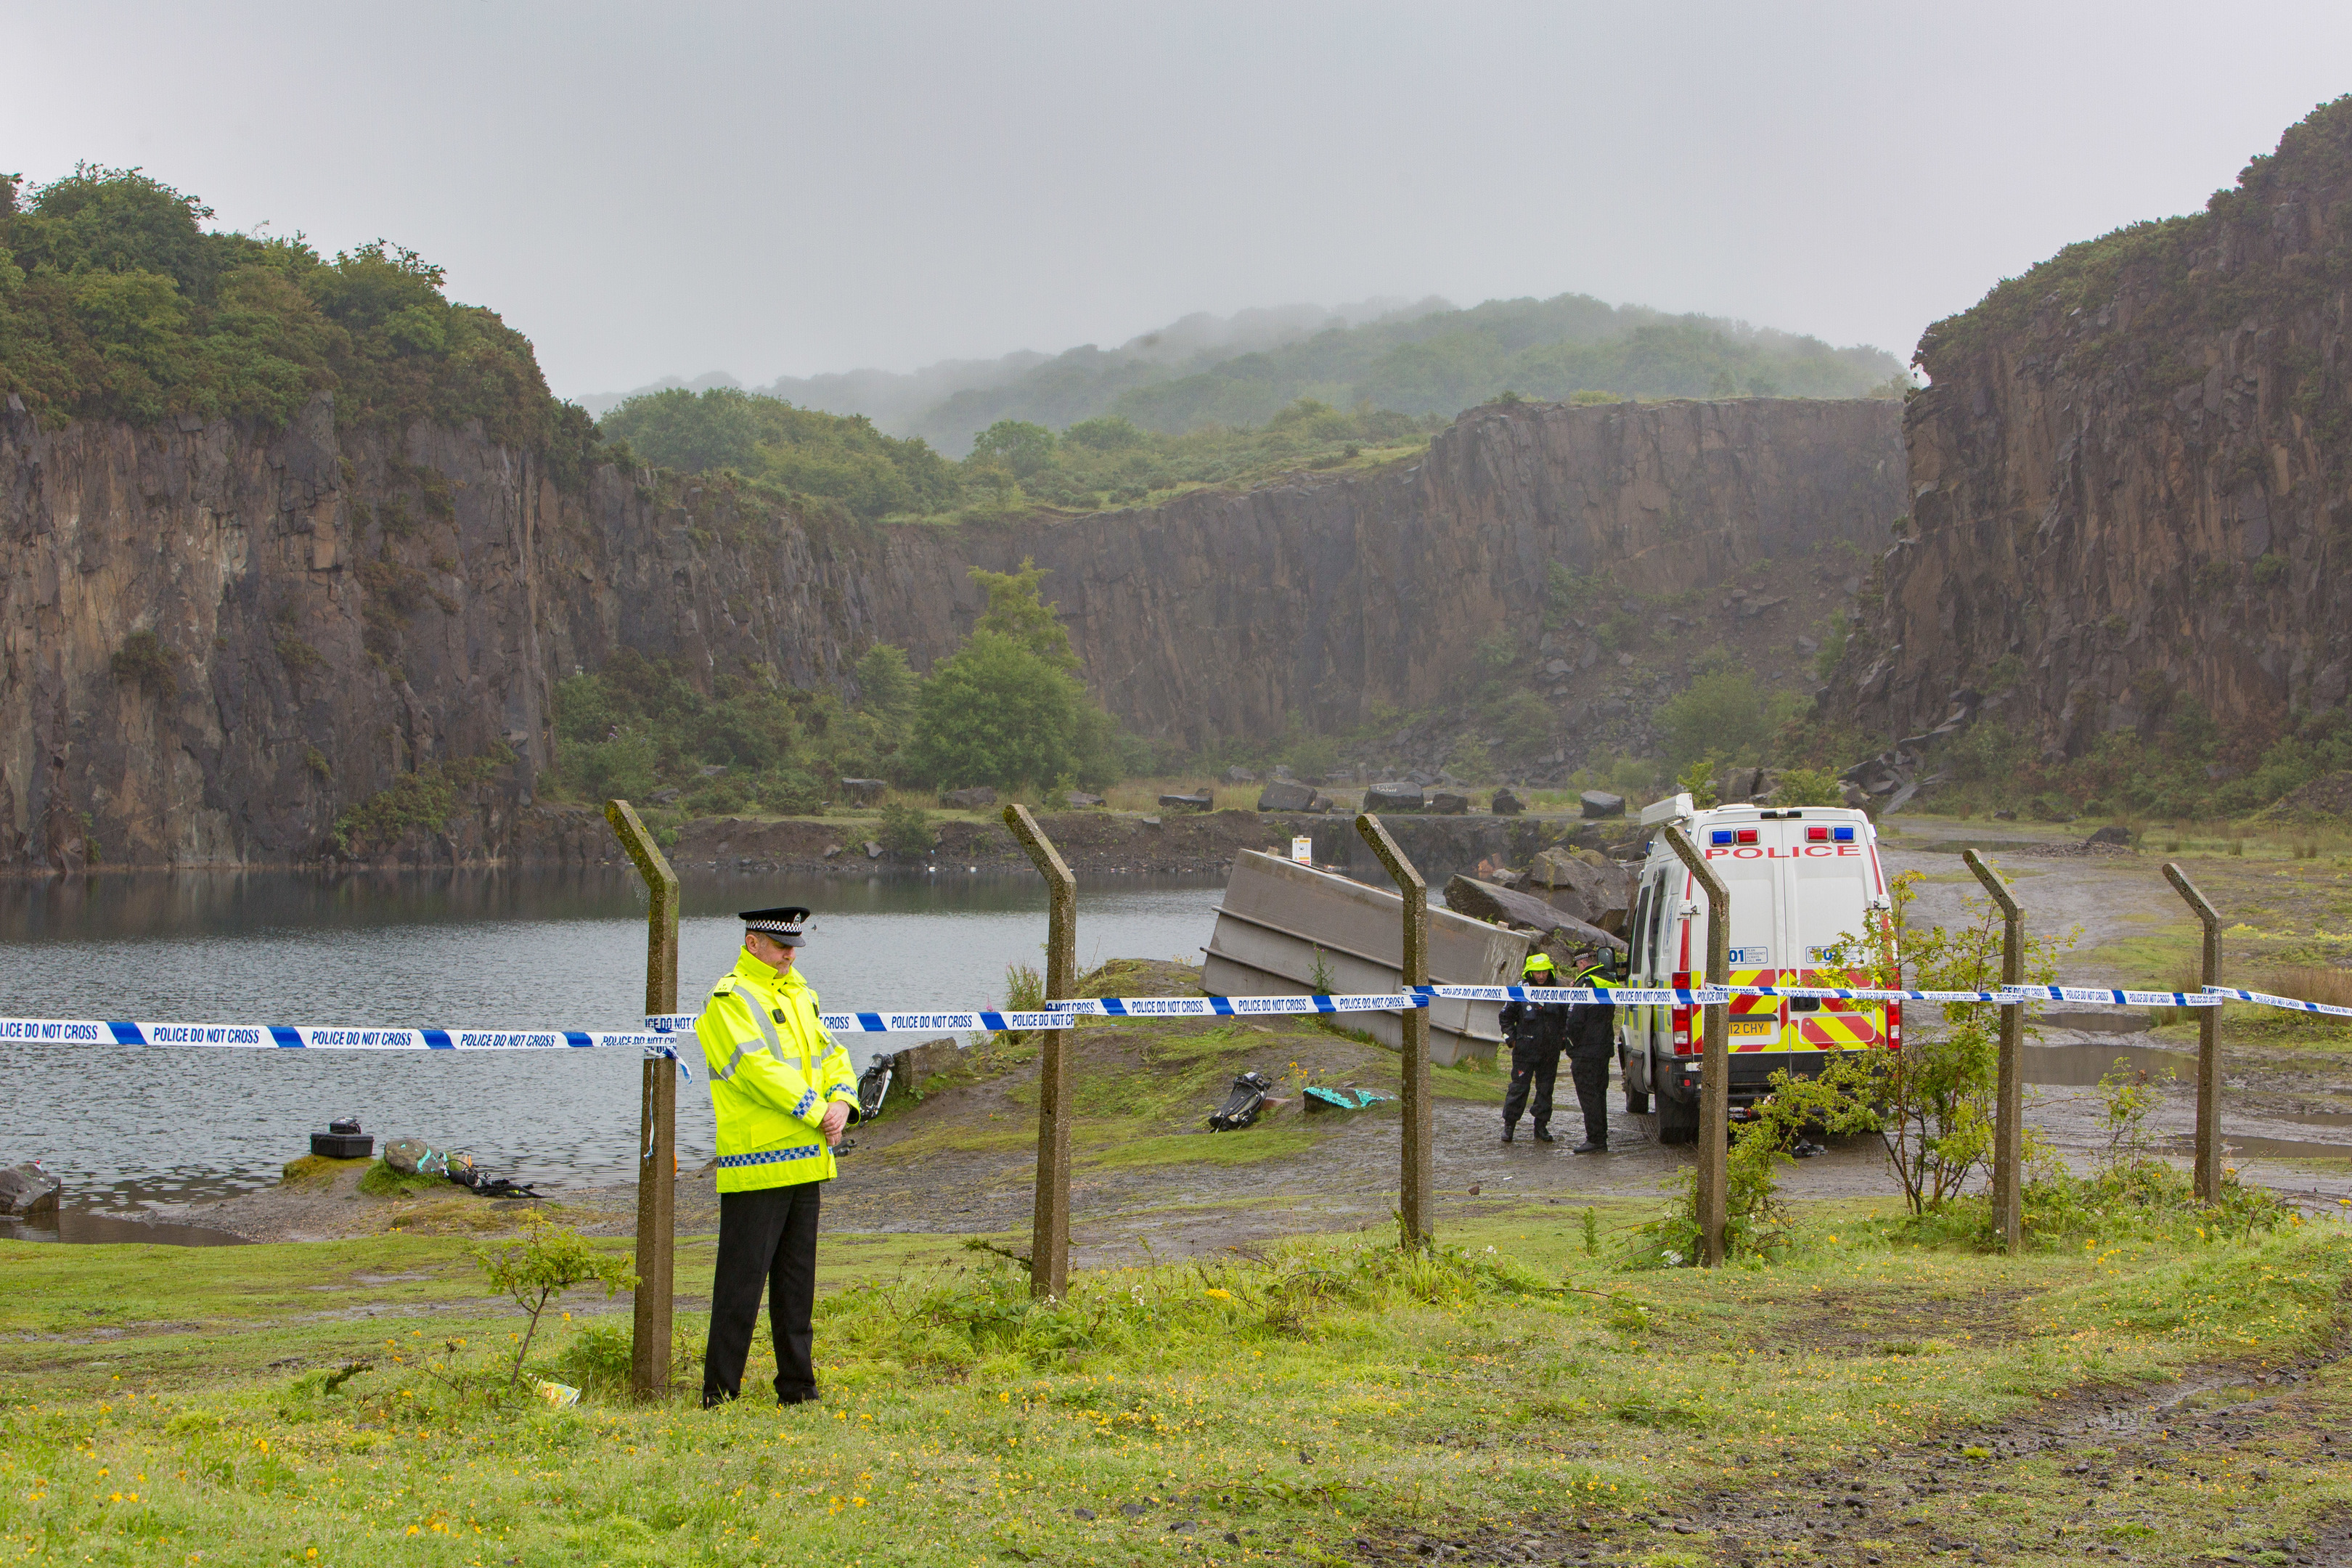 Prestonhill Quarry was the scene of another tragedy last month.